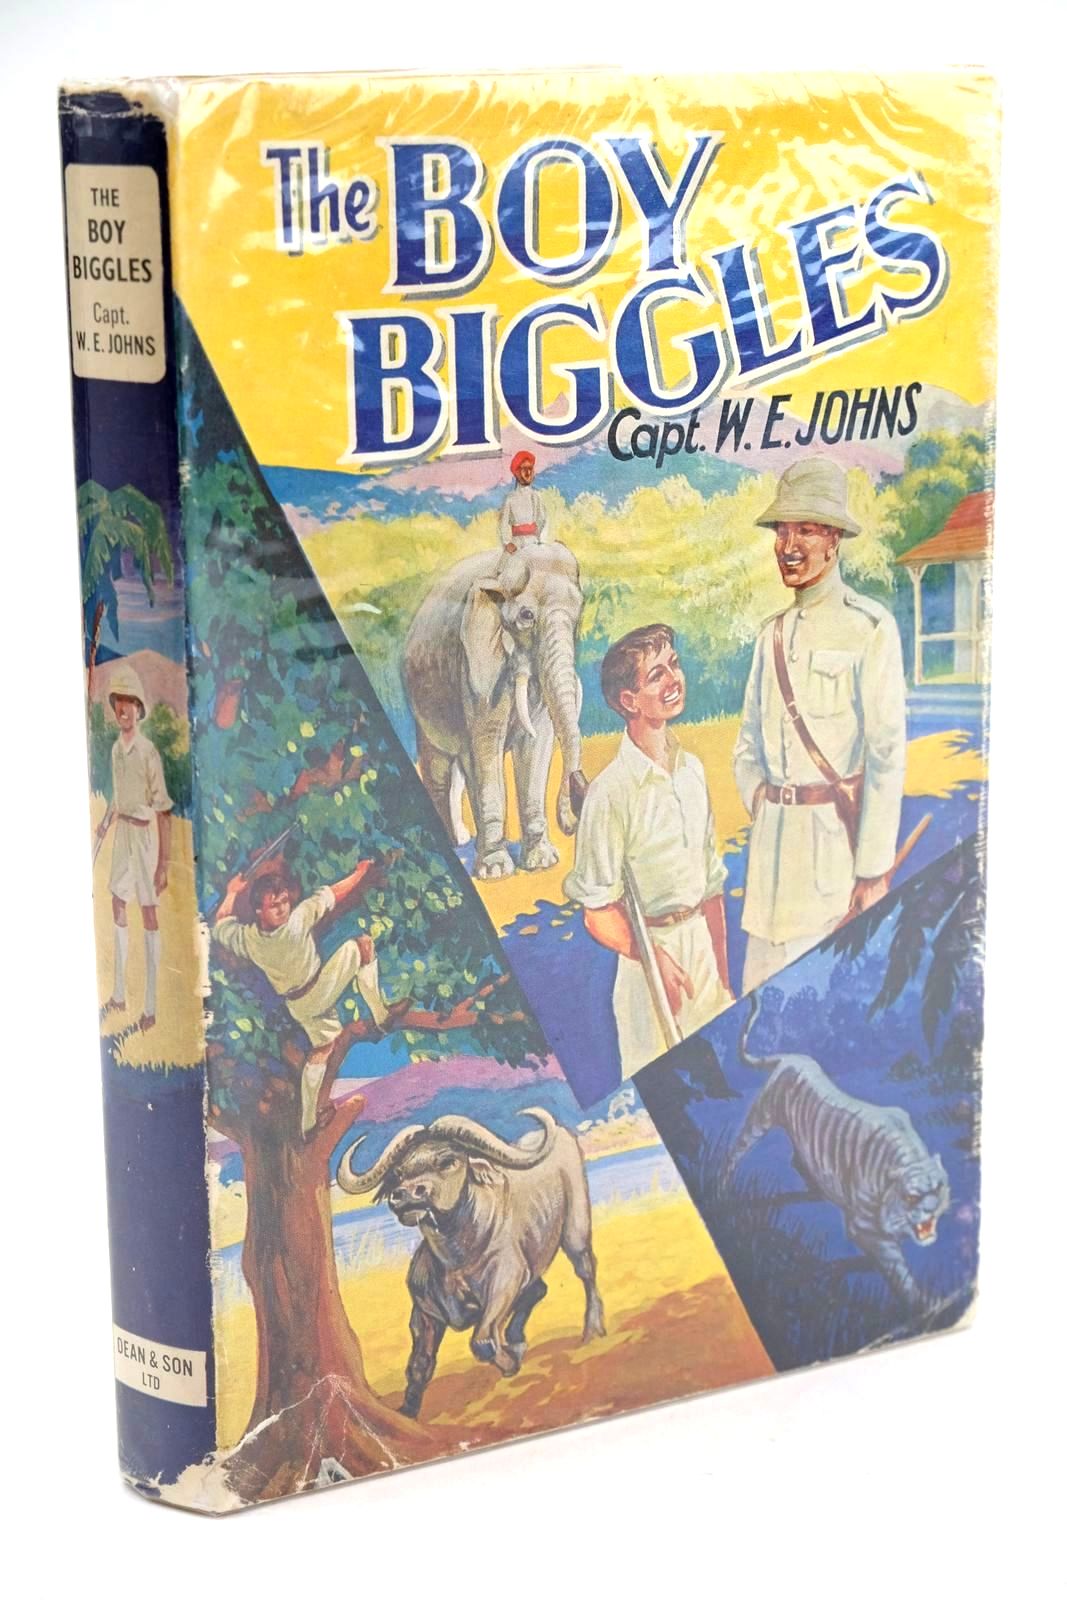 Photo of THE BOY BIGGLES written by Johns, W.E. published by Dean & Son Ltd. (STOCK CODE: 1324363)  for sale by Stella & Rose's Books